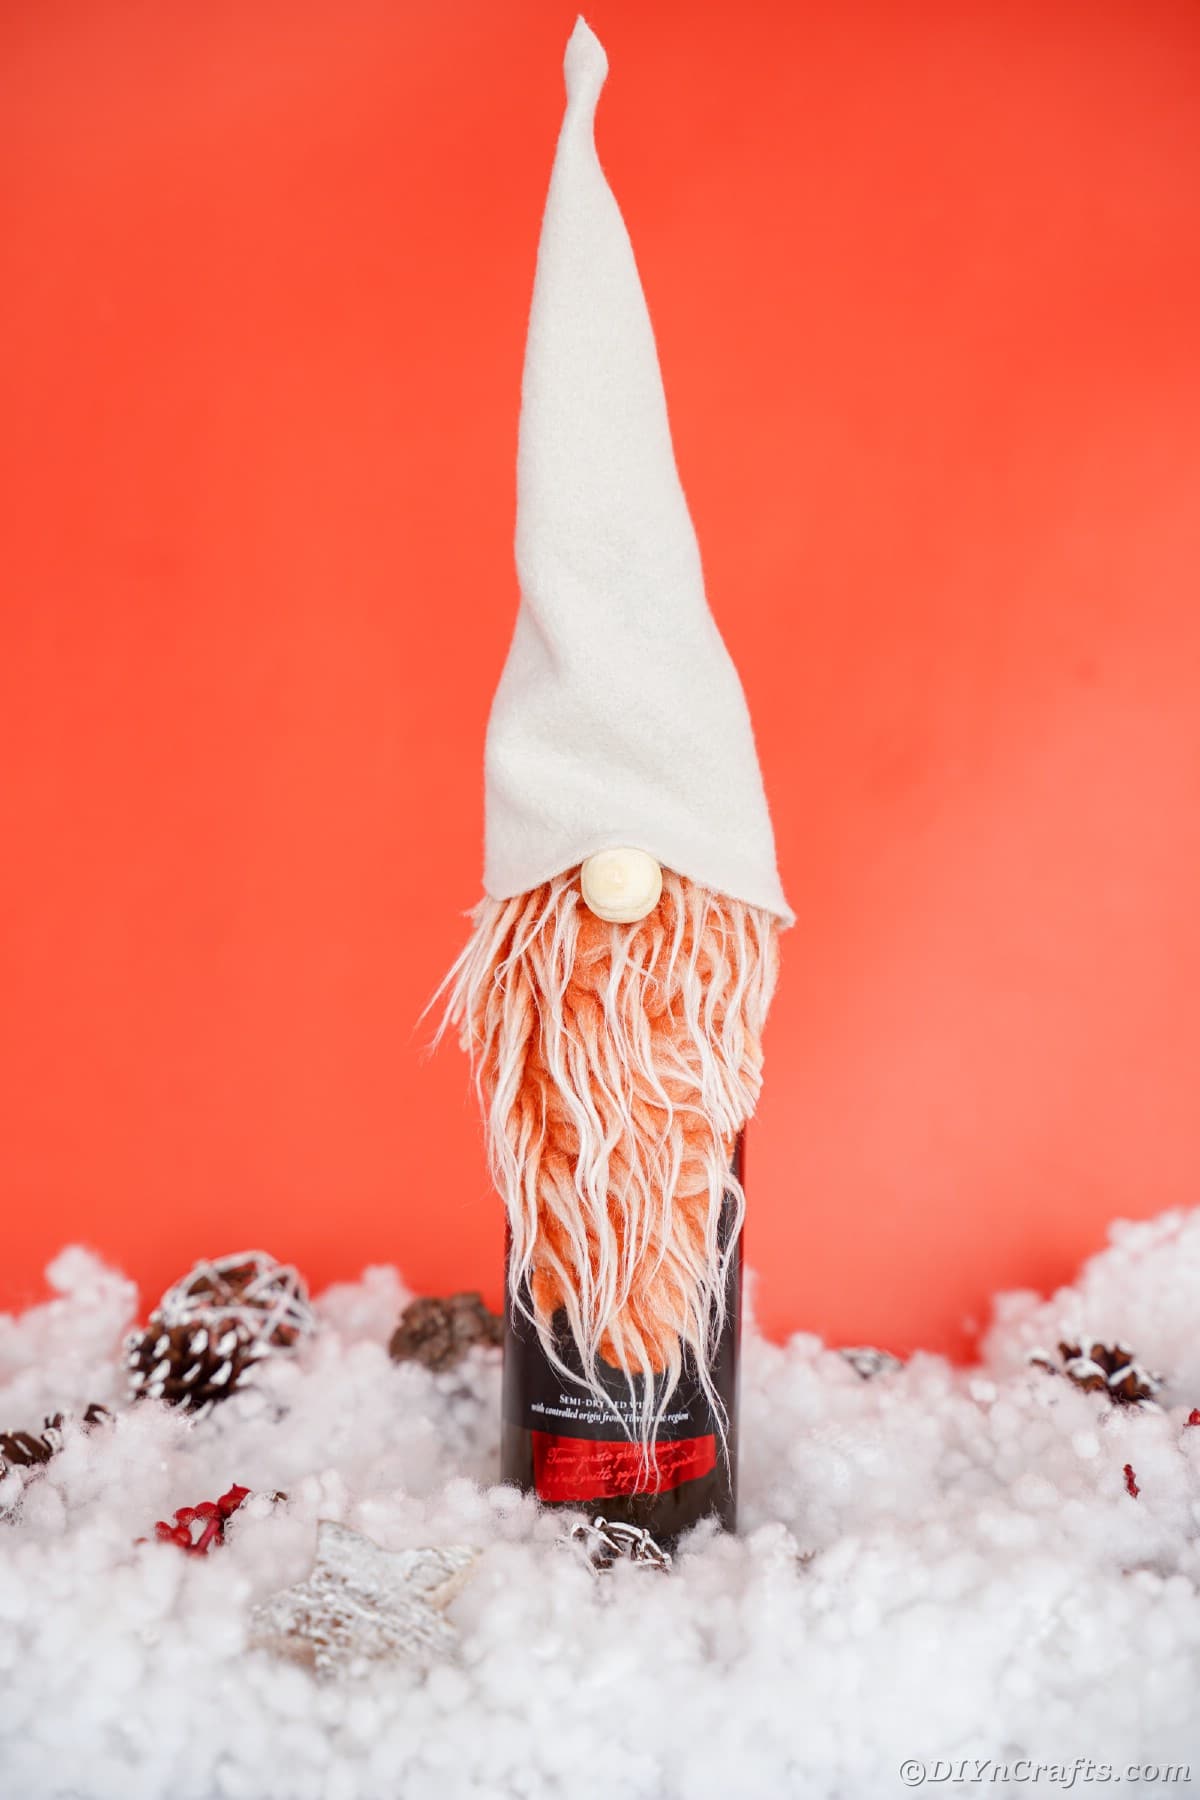 gnome on top of wine bottle sitting on fake snow with red background